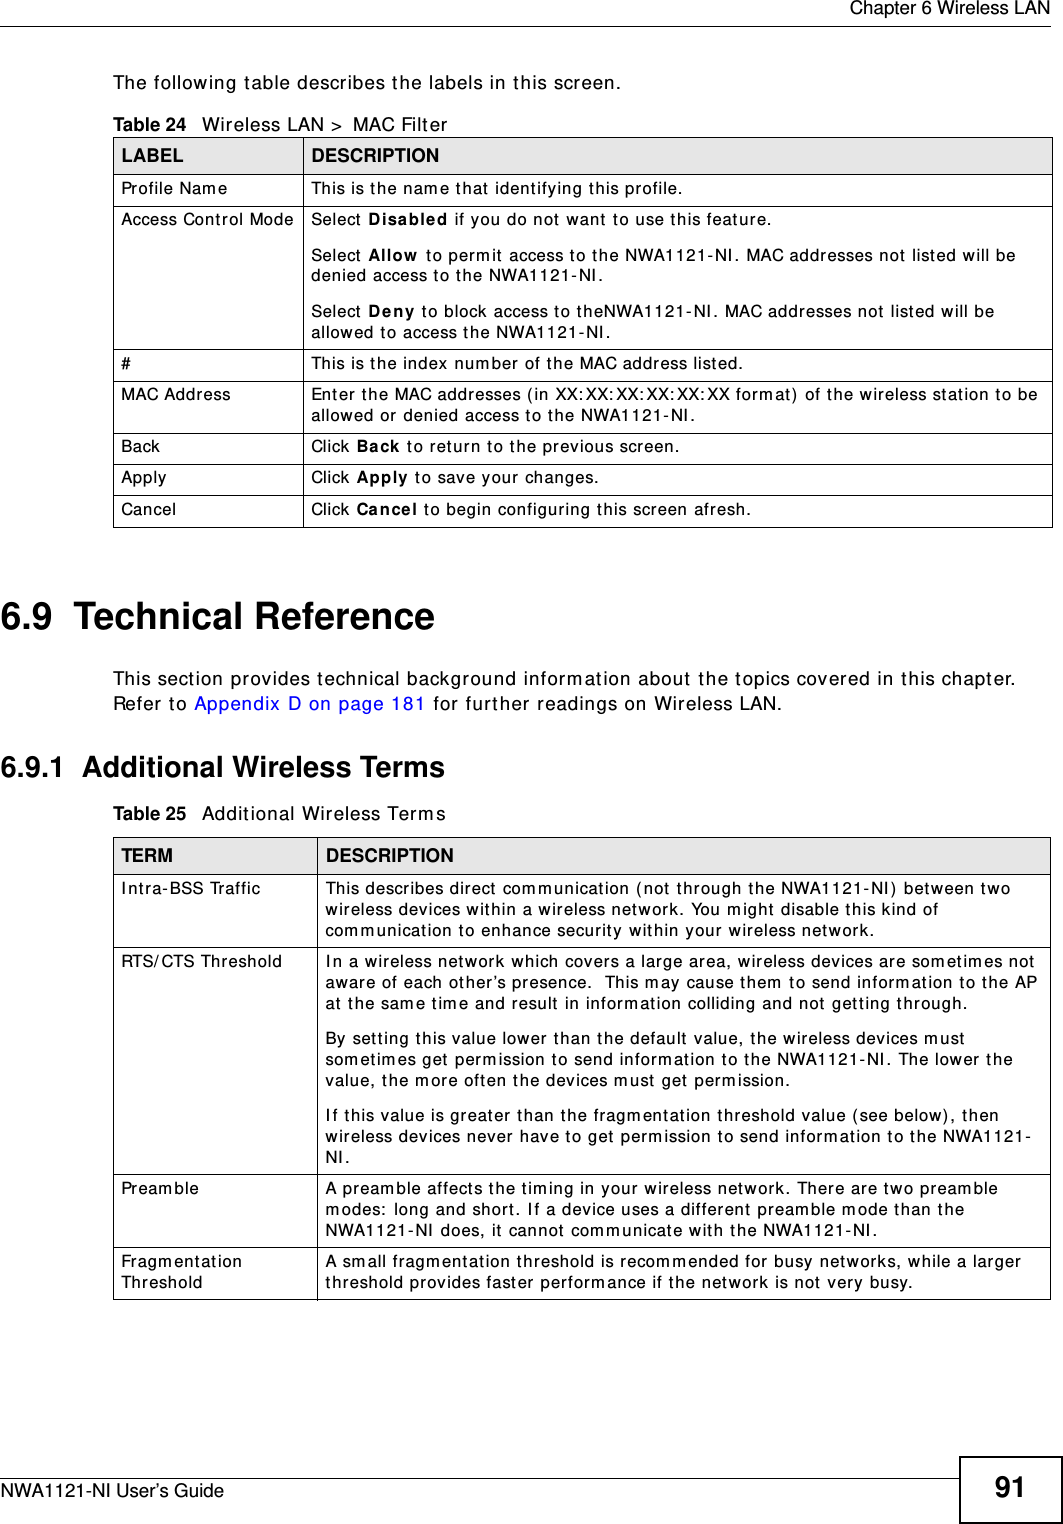  Chapter 6 Wireless LANNWA1121-NI User’s Guide 91The following table describes the labels in this screen.6.9  Technical ReferenceThis section provides technical background information about the topics covered in this chapter. Refer to Appendix D on page 181 for further readings on Wireless LAN.6.9.1  Additional Wireless TermsTable 25   Additional Wireless TermsTable 24   Wireless LAN &gt; MAC FilterLABEL DESCRIPTIONProfile Name This is the name that identifying this profile.Access Control Mode Select Disabled if you do not want to use this feature.Select Allow to permit access to the NWA1121-NI. MAC addresses not listed will be denied access to the NWA1121-NI.Select Deny to block access to theNWA1121-NI. MAC addresses not listed will be allowed to access the NWA1121-NI.#This is the index number of the MAC address listed.MAC Address Enter the MAC addresses (in XX:XX:XX:XX:XX:XX format) of the wireless station to be allowed or denied access to the NWA1121-NI.Back Click Back to return to the previous screen.Apply Click Apply to save your changes.Cancel Click Cancel to begin configuring this screen afresh.TERM DESCRIPTIONIntra-BSS Traffic This describes direct communication (not through the NWA1121-NI) between two wireless devices within a wireless network. You might disable this kind of communication to enhance security within your wireless network.RTS/CTS Threshold In a wireless network which covers a large area, wireless devices are sometimes not aware of each other’s presence.  This may cause them to send information to the AP at the same time and result in information colliding and not getting through.By setting this value lower than the default value, the wireless devices must sometimes get permission to send information to the NWA1121-NI. The lower the value, the more often the devices must get permission.If this value is greater than the fragmentation threshold value (see below), then wireless devices never have to get permission to send information to the NWA1121-NI.Preamble A preamble affects the timing in your wireless network. There are two preamble modes: long and short. If a device uses a different preamble mode than the NWA1121-NI does, it cannot communicate with the NWA1121-NI.Fragmentation Threshold A small fragmentation threshold is recommended for busy networks, while a larger threshold provides faster performance if the network is not very busy.